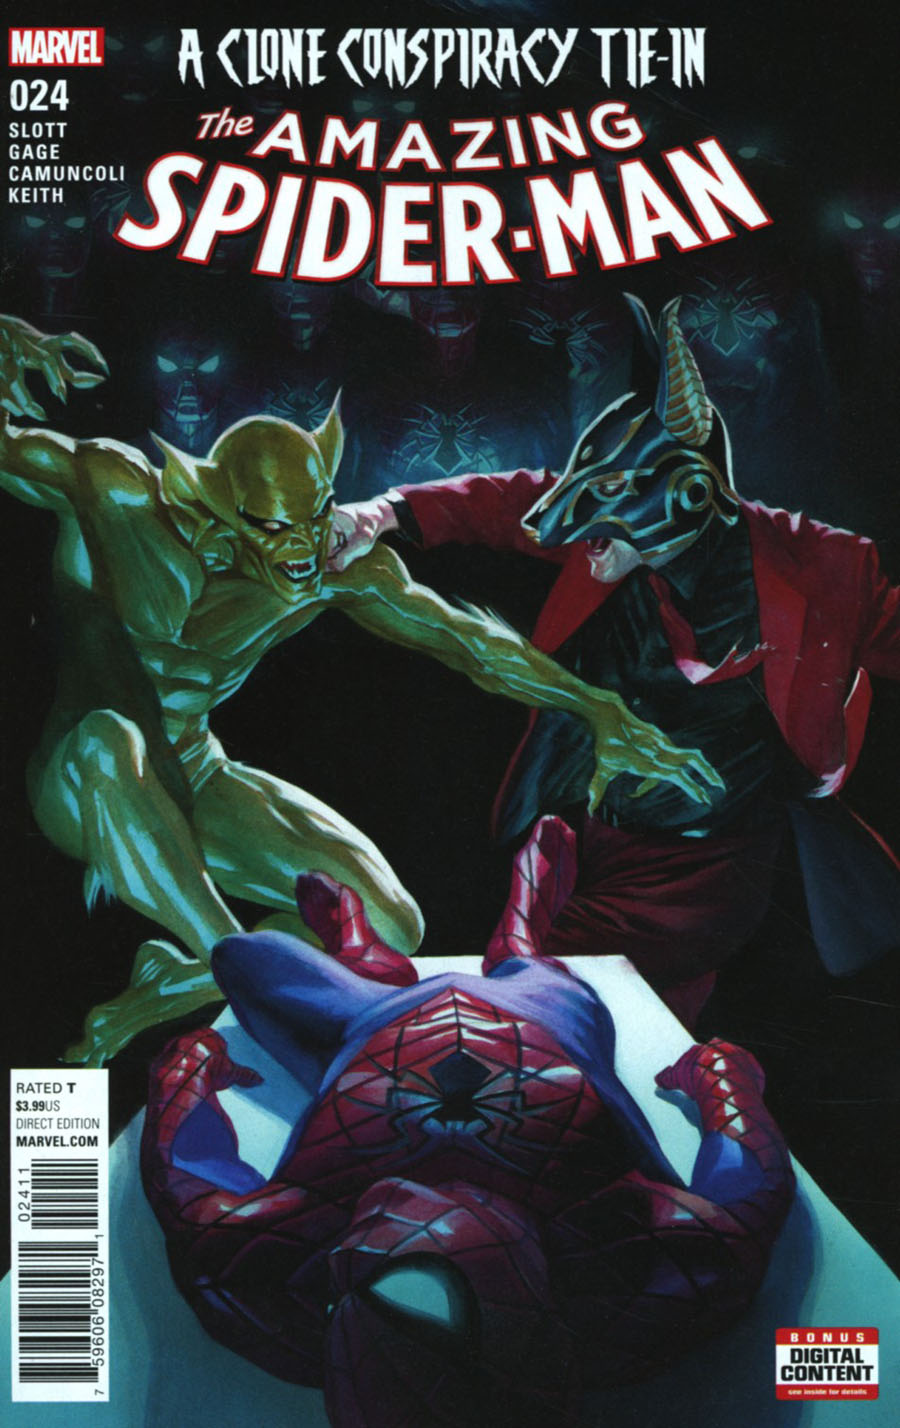 Amazing Spider-Man Vol 4 #24 Cover A Regular Alex Ross Cover (Clone Conspiracy Tie-In)